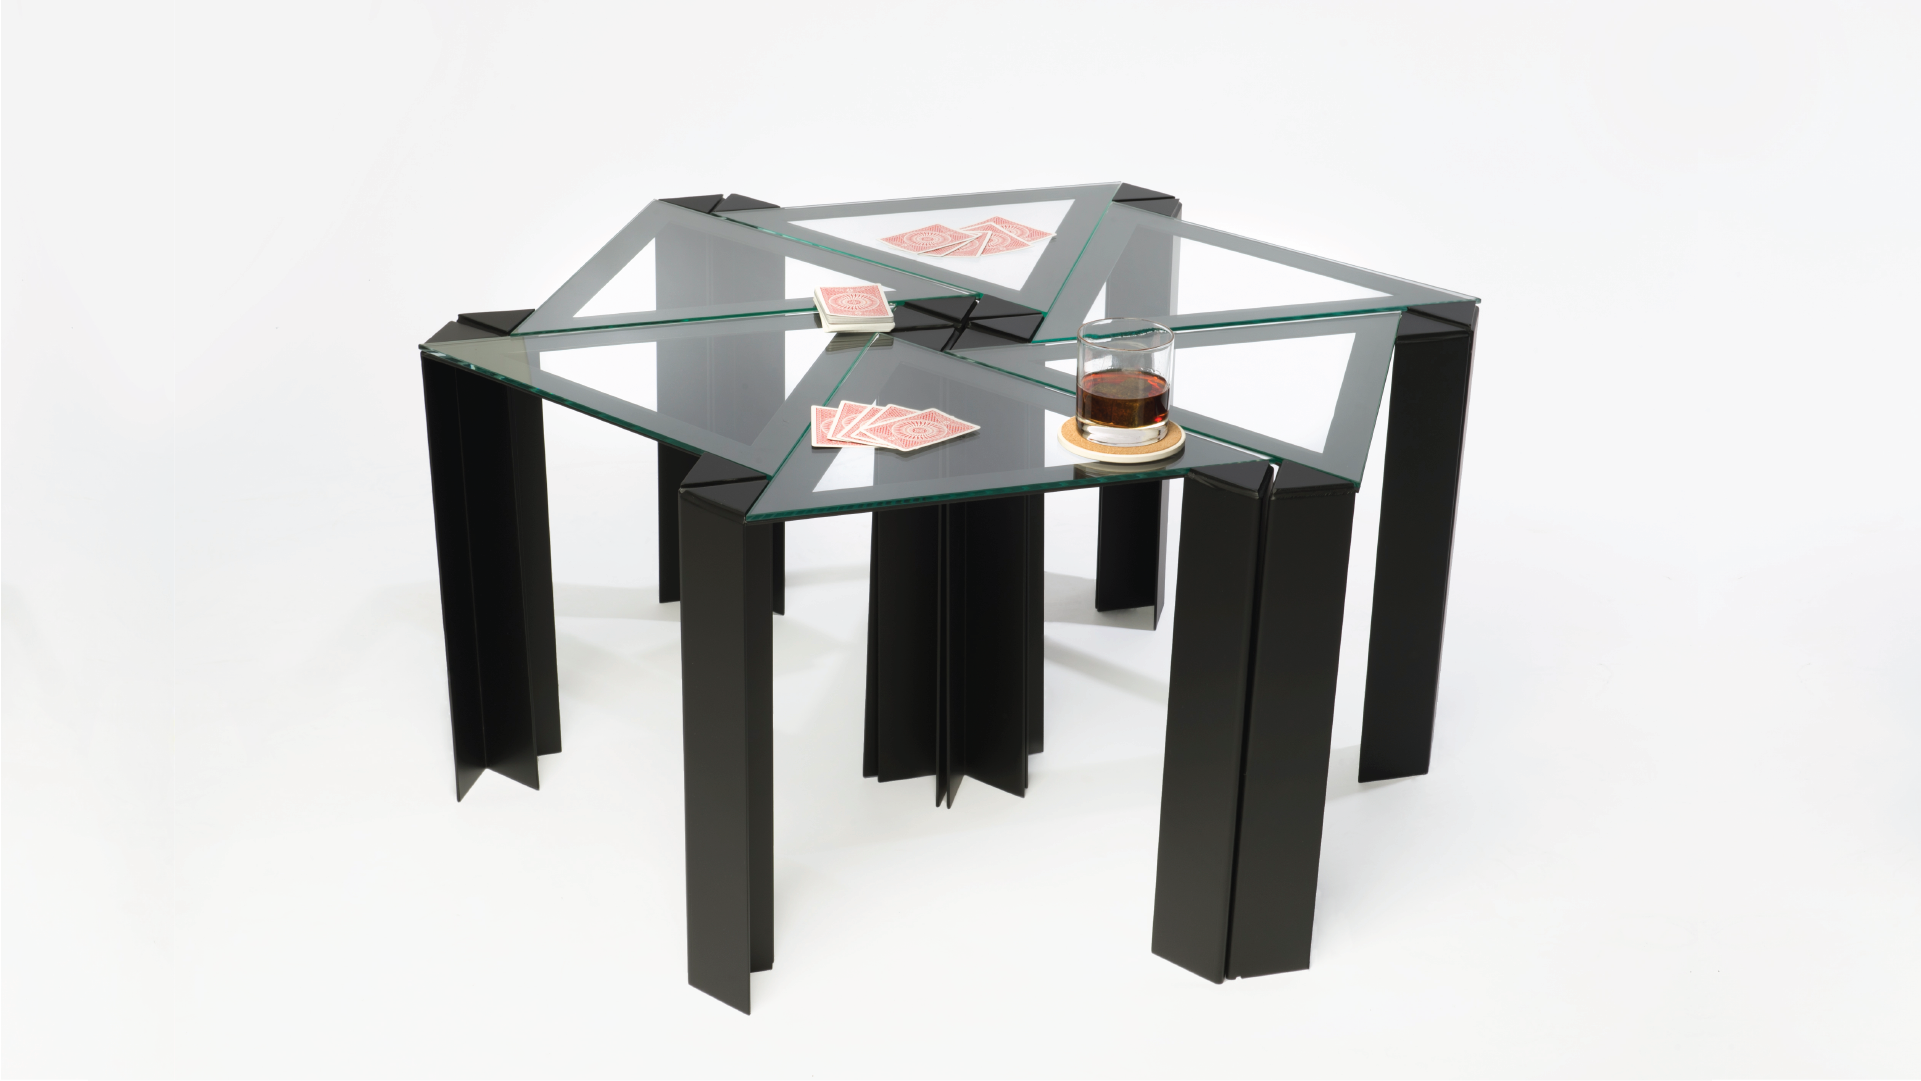 A series of six stainless steel tables in a triangular shape with glass tabletops. The tables are placed closed to each other, forming a bigger one.